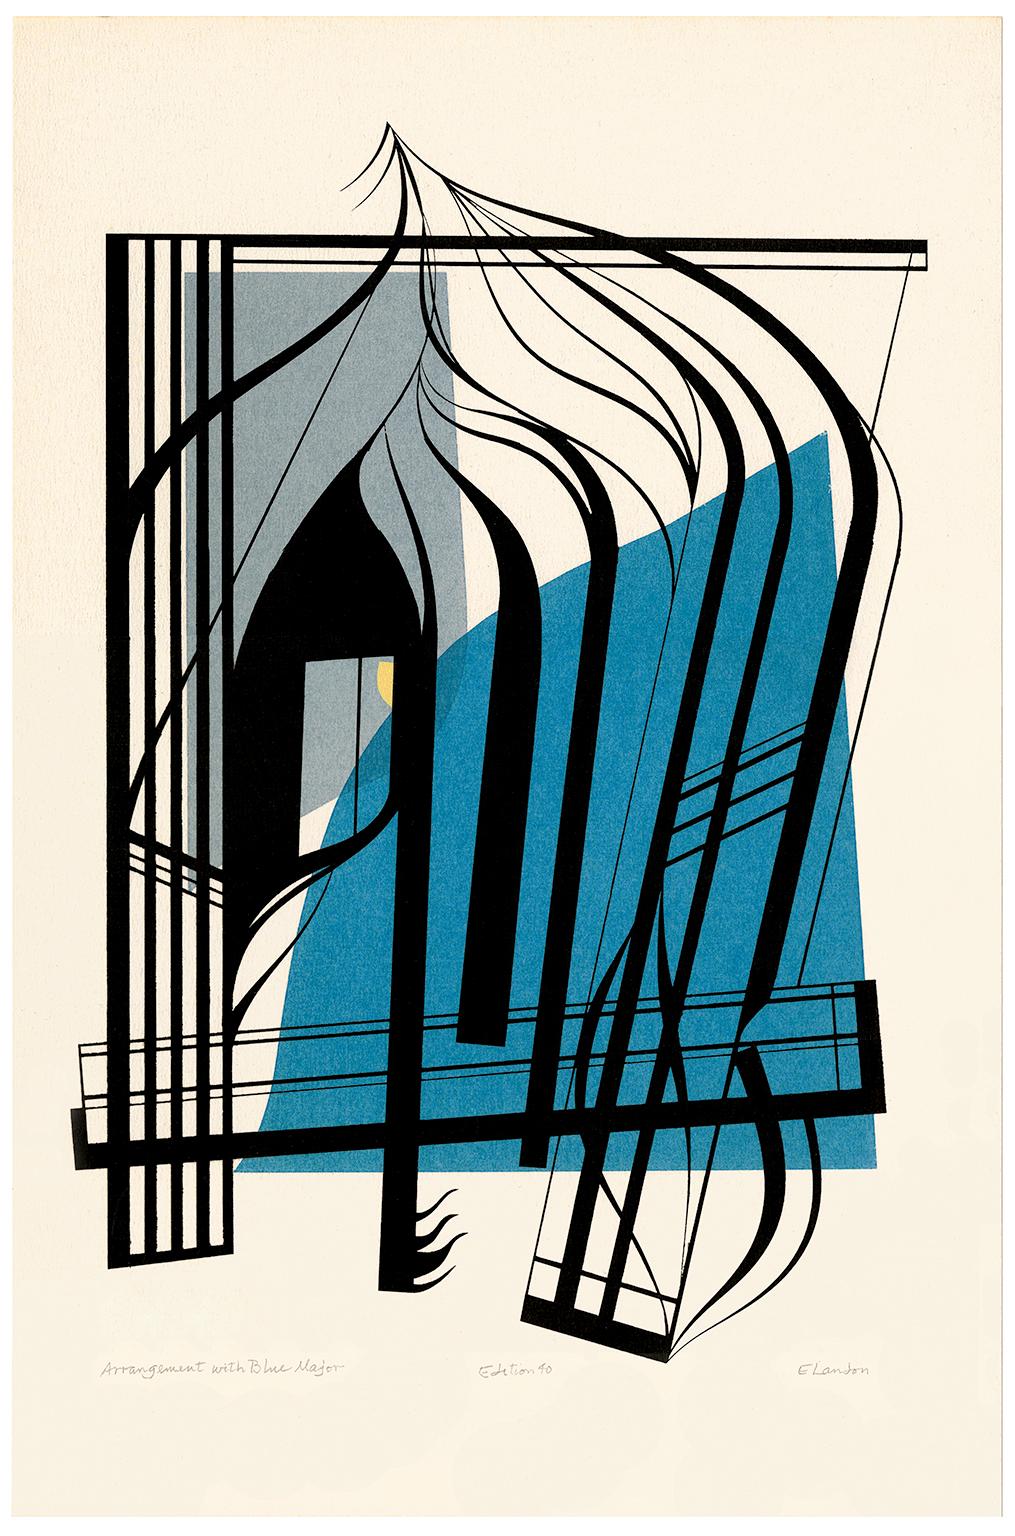 'Arrangement with Blue Major' — Mid-Century Abstraction - Print by Edward August Landon